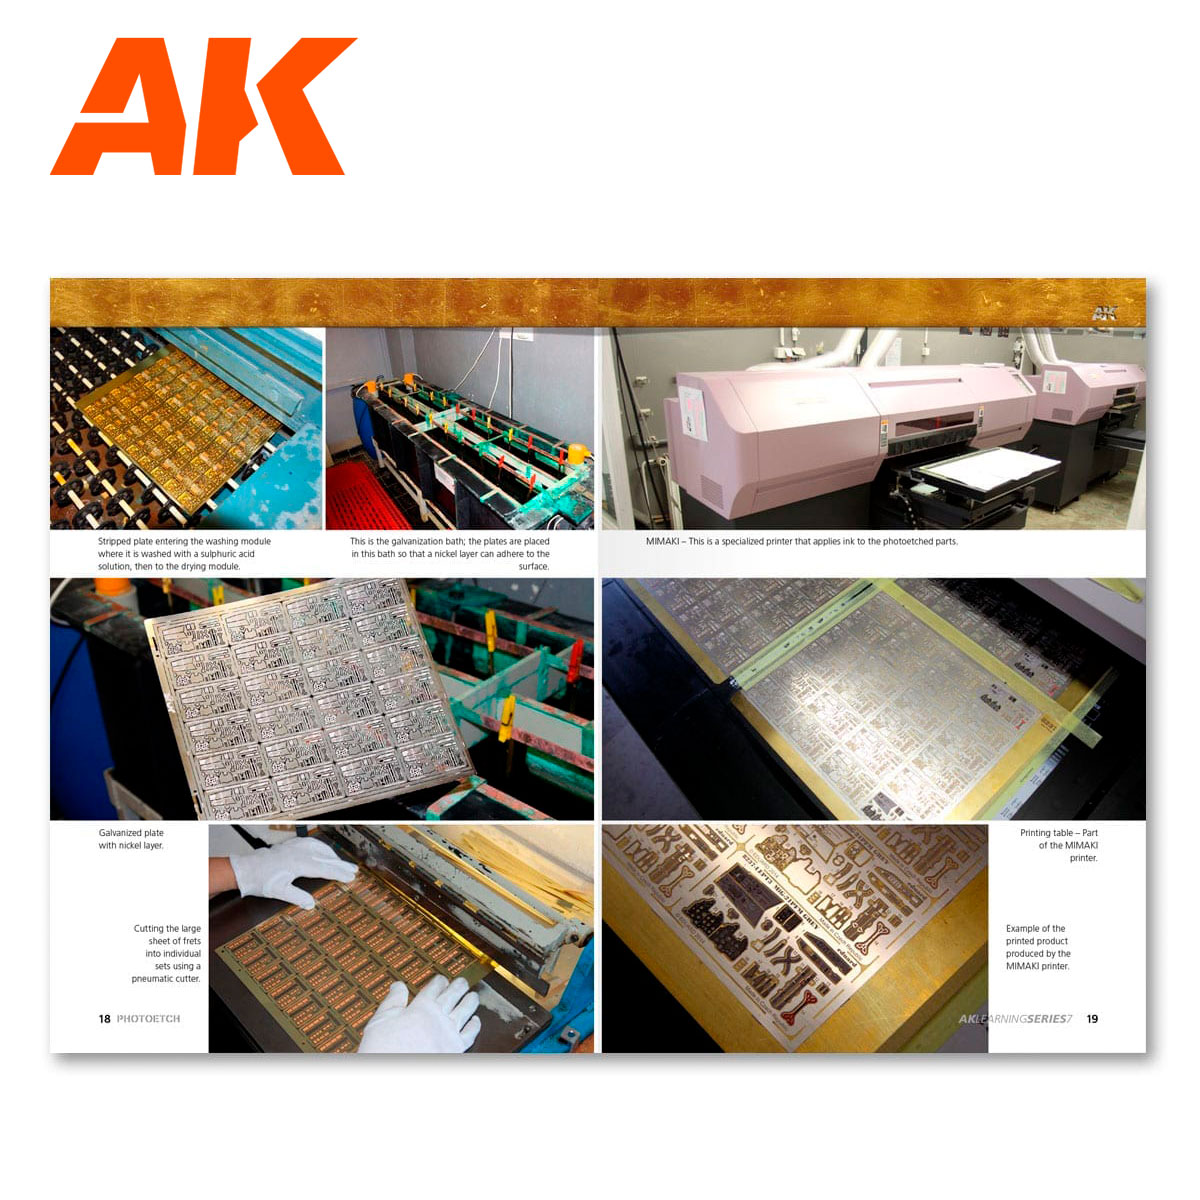 AK Learning Series: 07 - Photoetched Parts